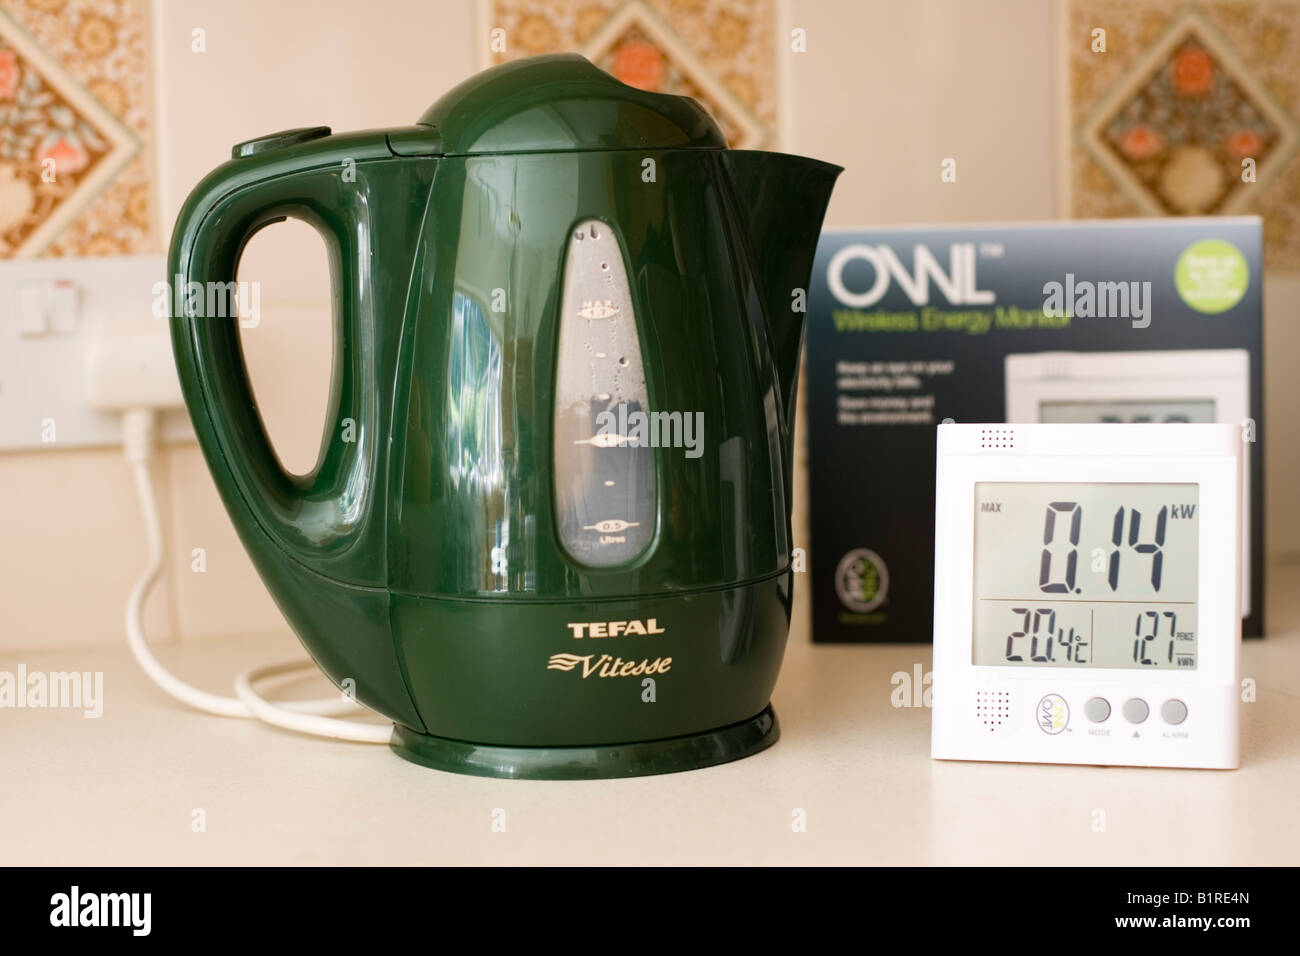 Owl energy monitor measuring electricity use of green kettle UK Stock Photo